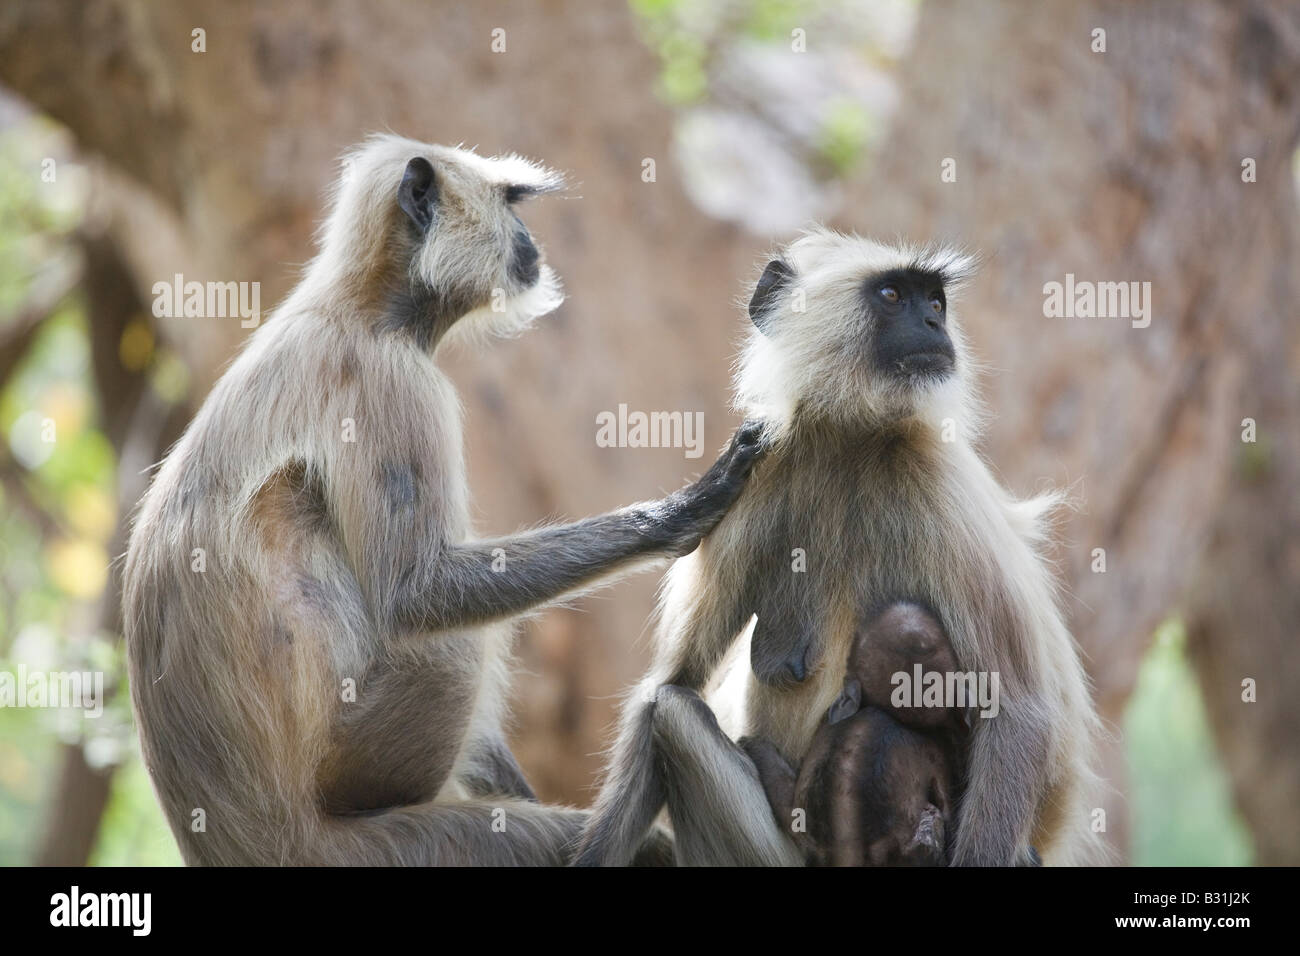 A family of Langur monkeys in Ranthambore National Park, India. Stock Photo